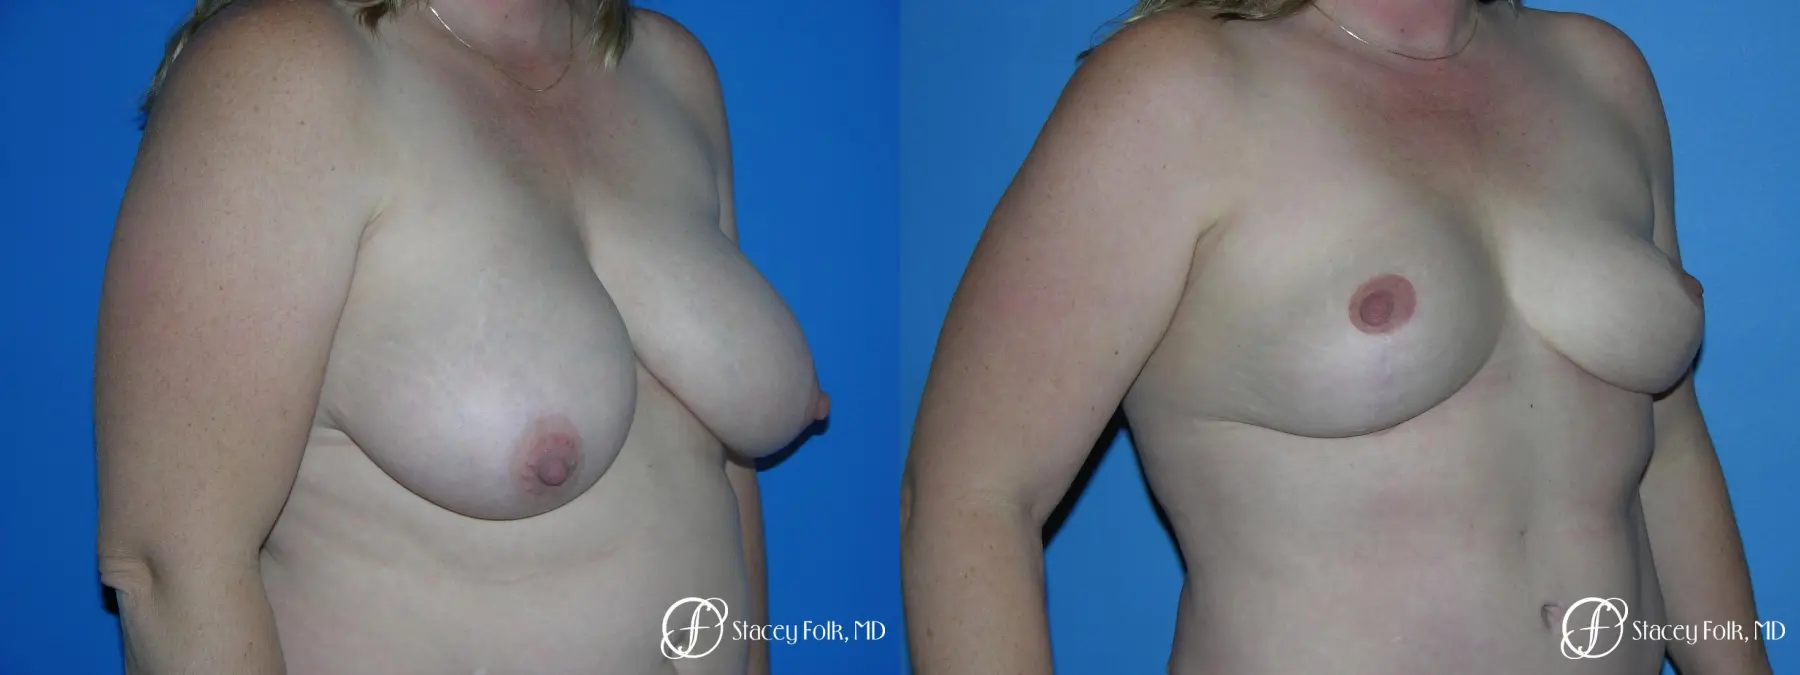 Denver Breast Reduction 4790 - Before and After 2